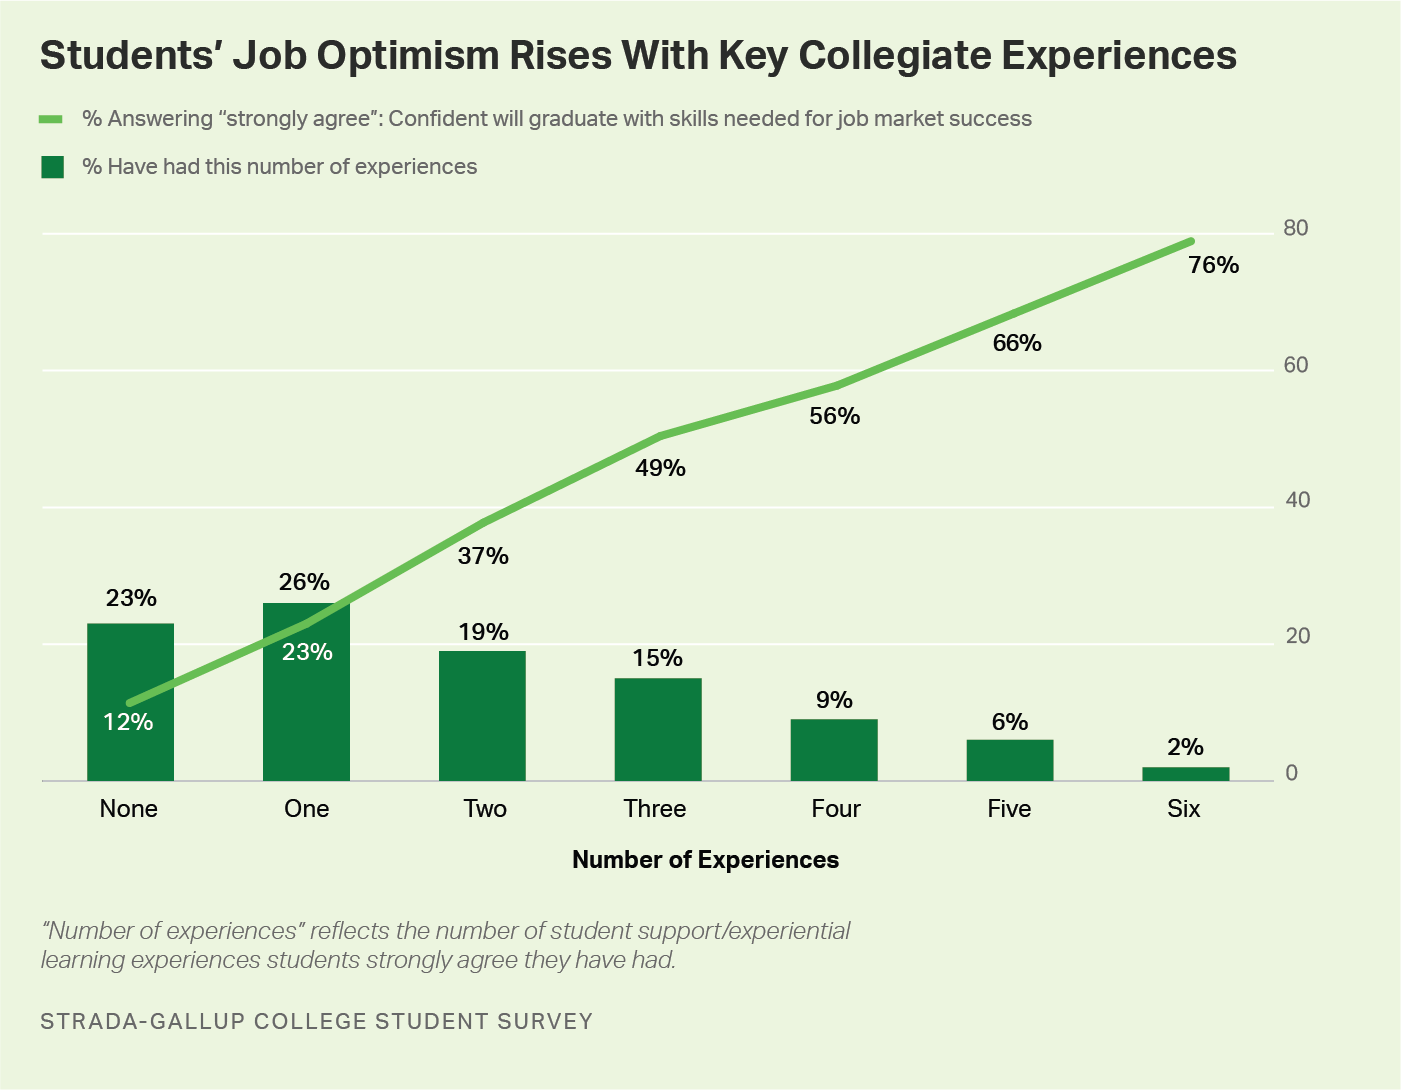 Line graph and bar graph. Students' job optimism rises with key collegiate experiences.